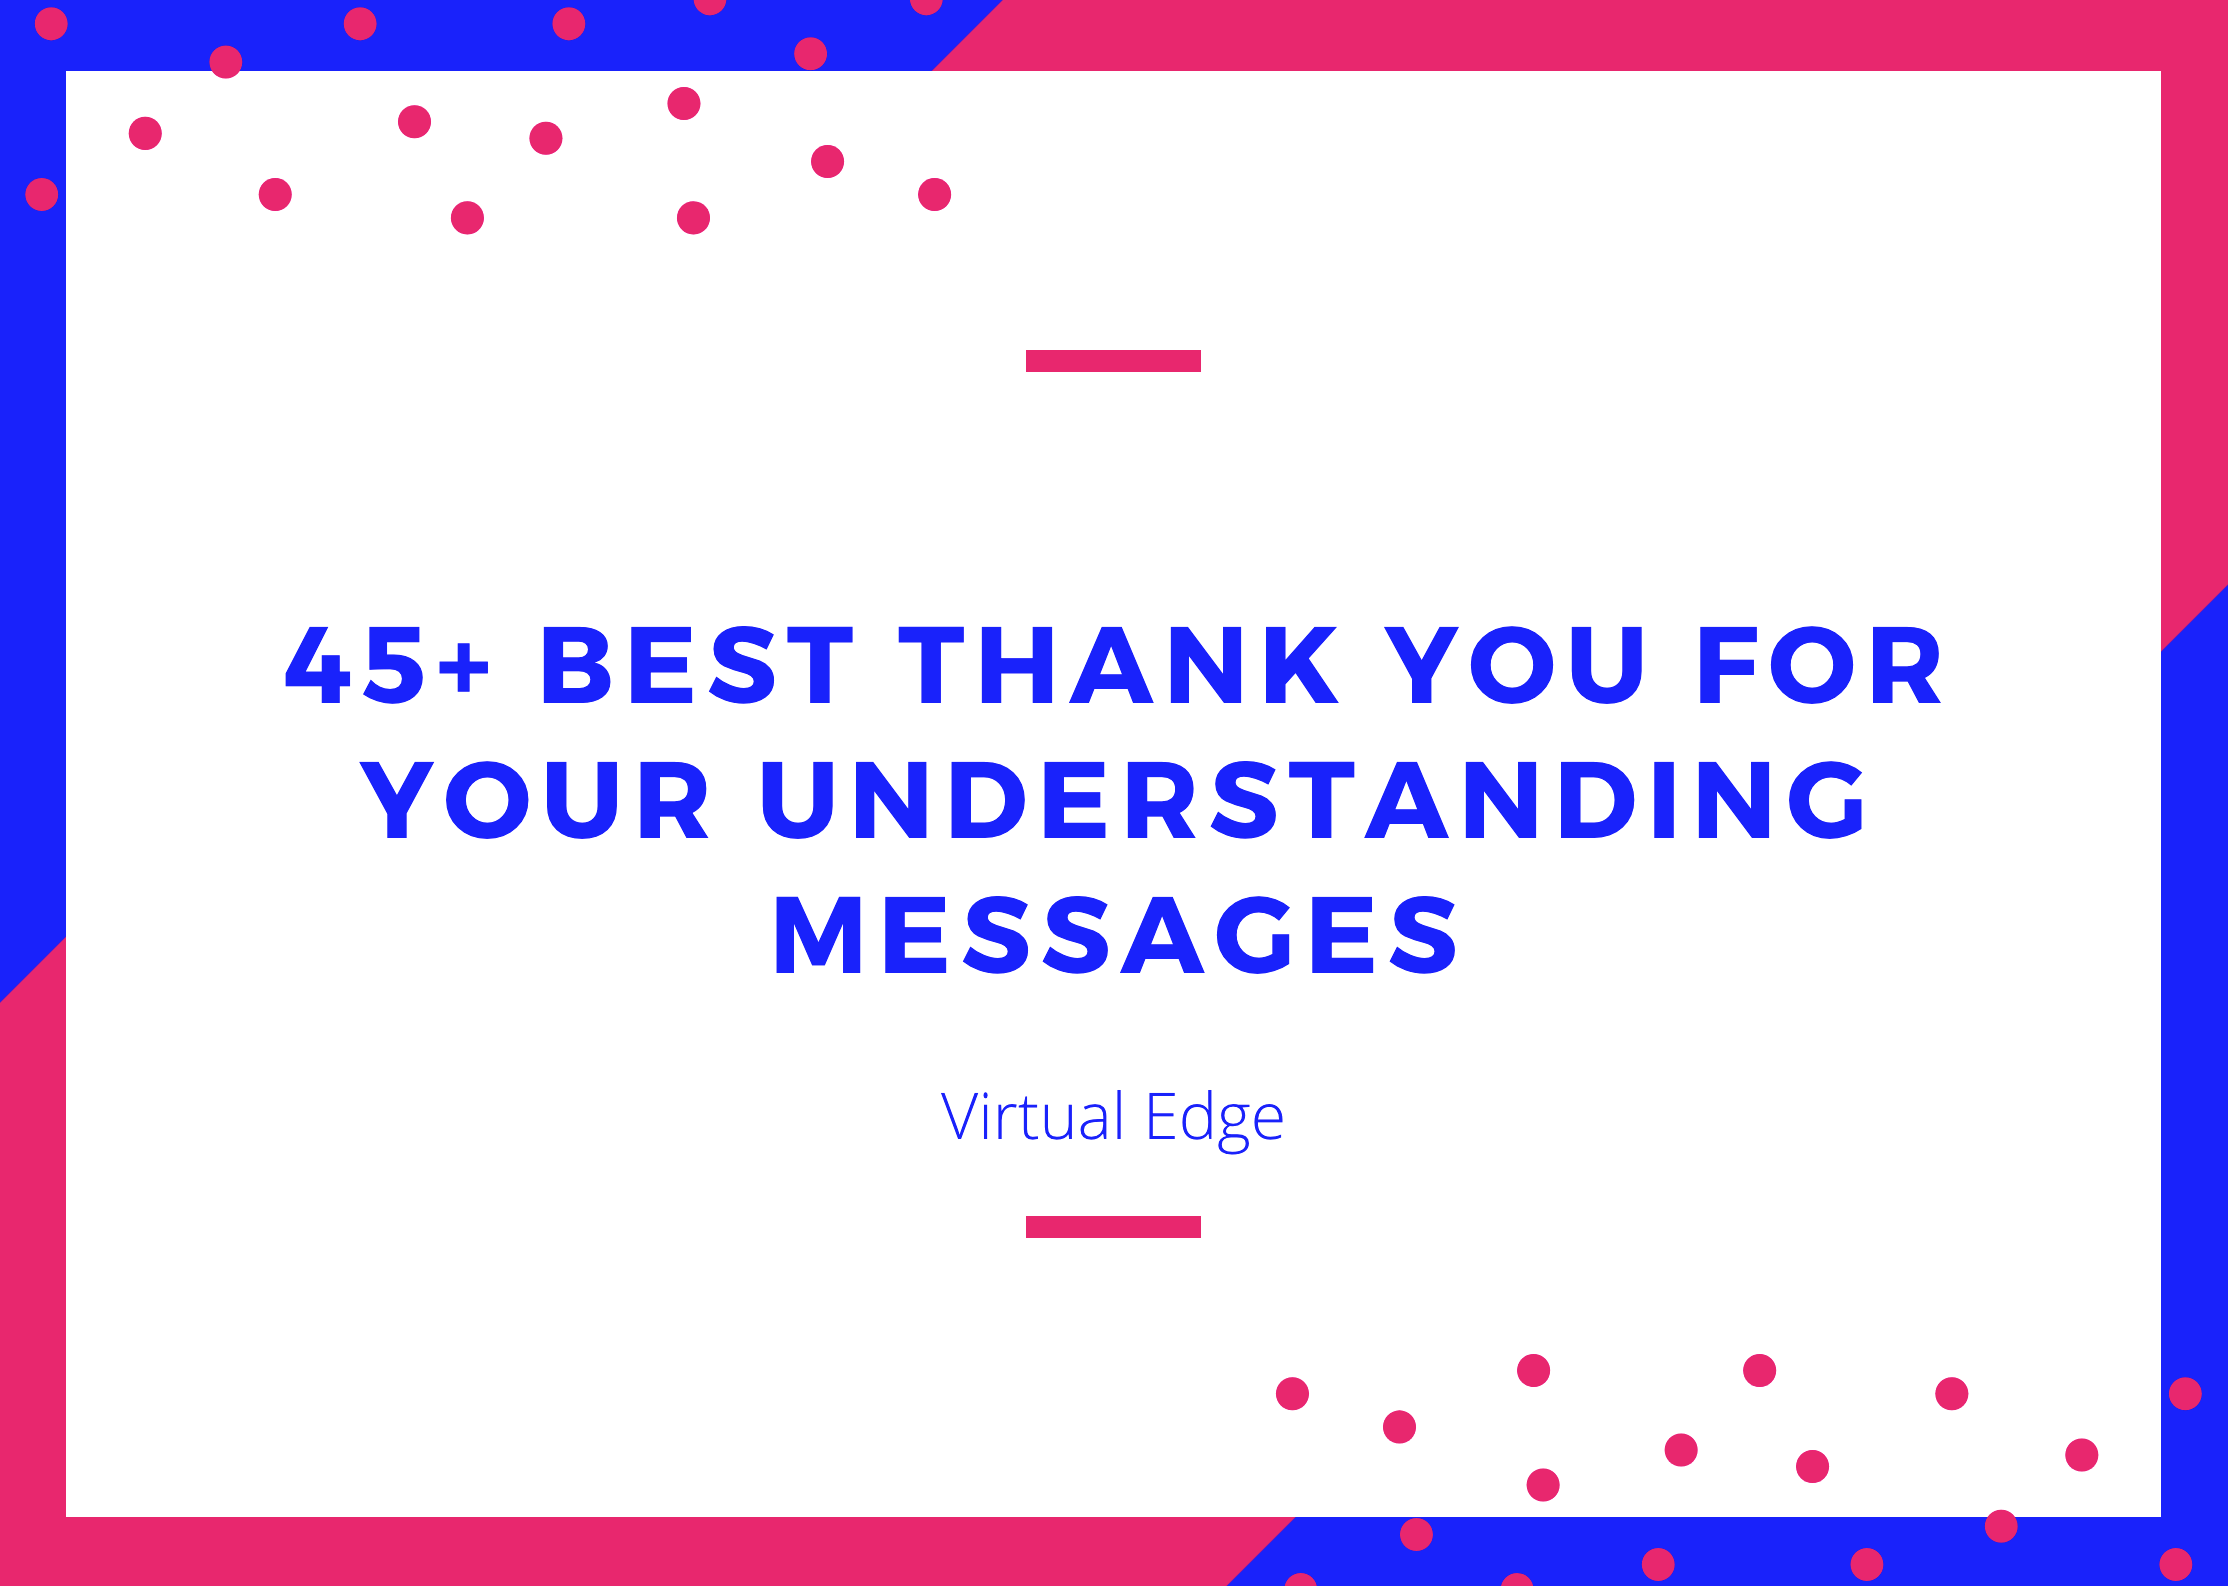 45+ Best Thank You for Your Understanding Messages